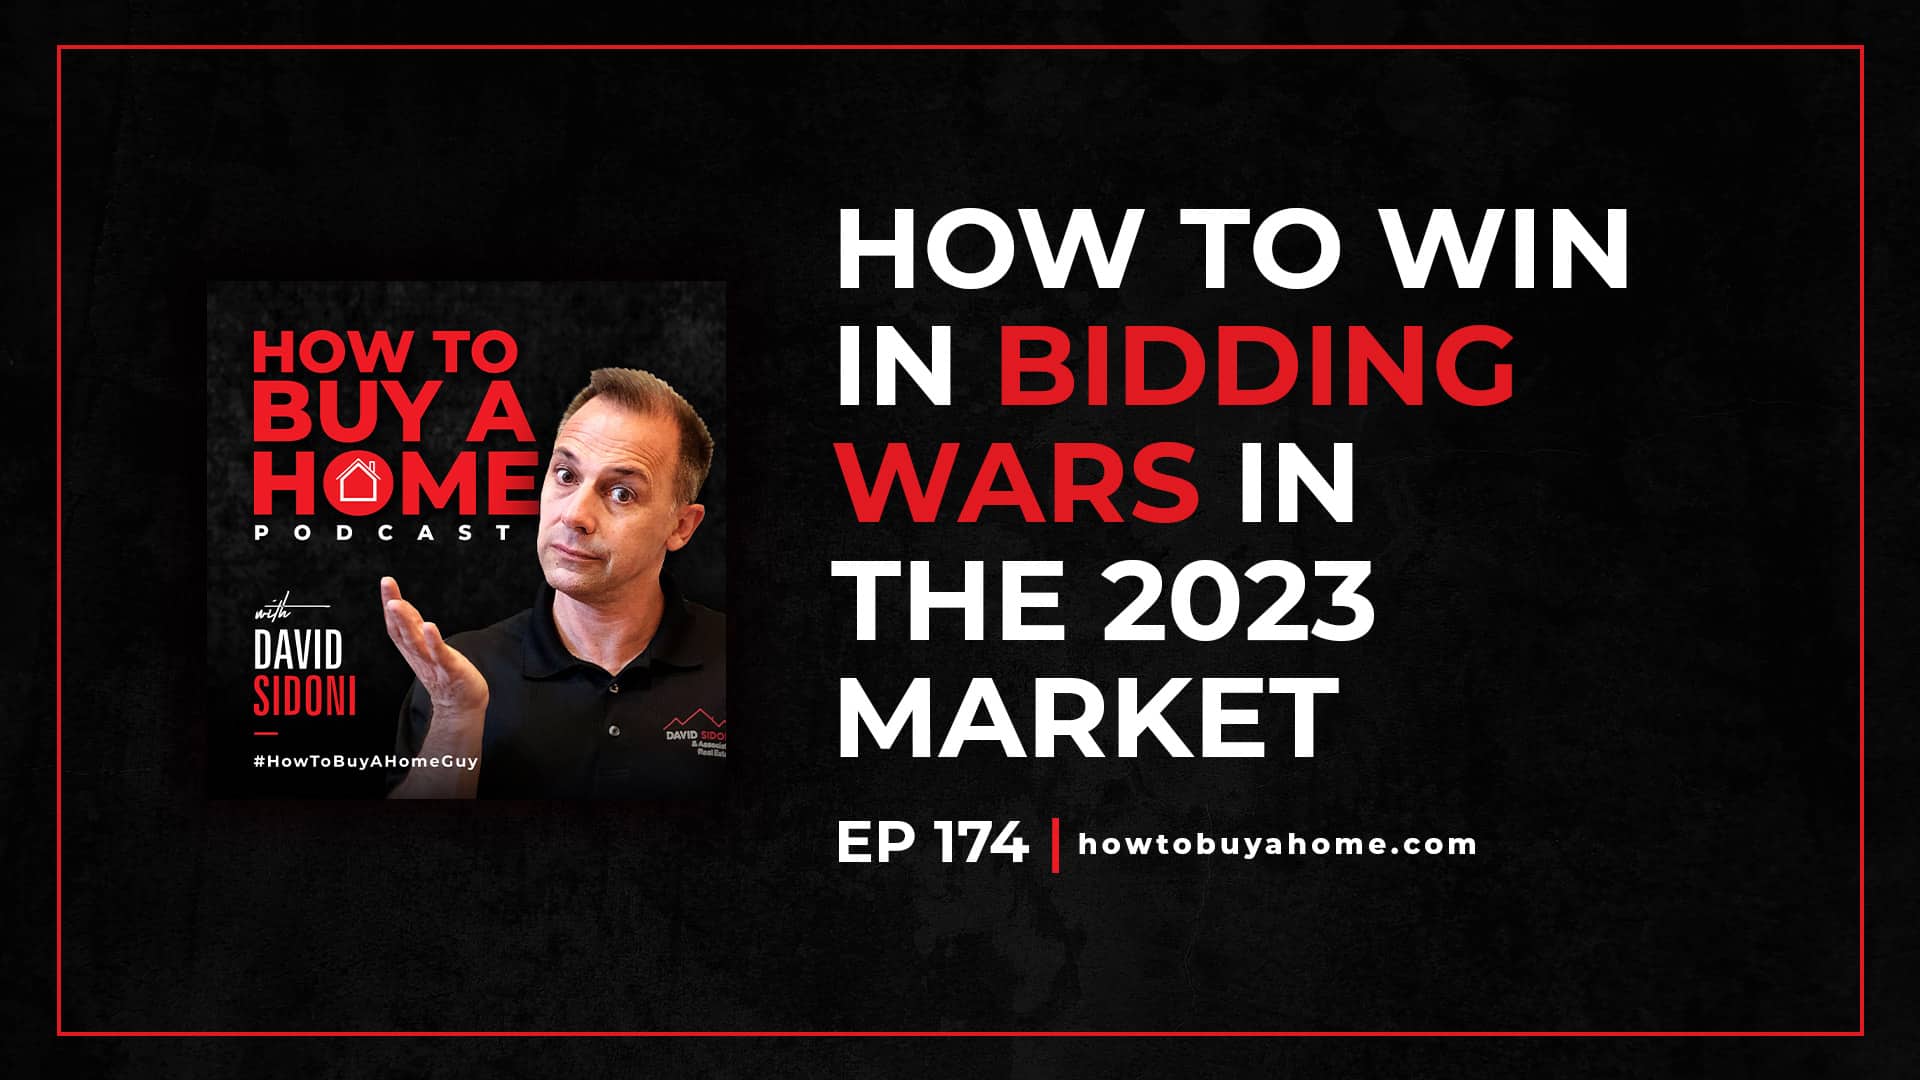 Ep. 174 – How to win in BIDDING WARS in the 2023 market